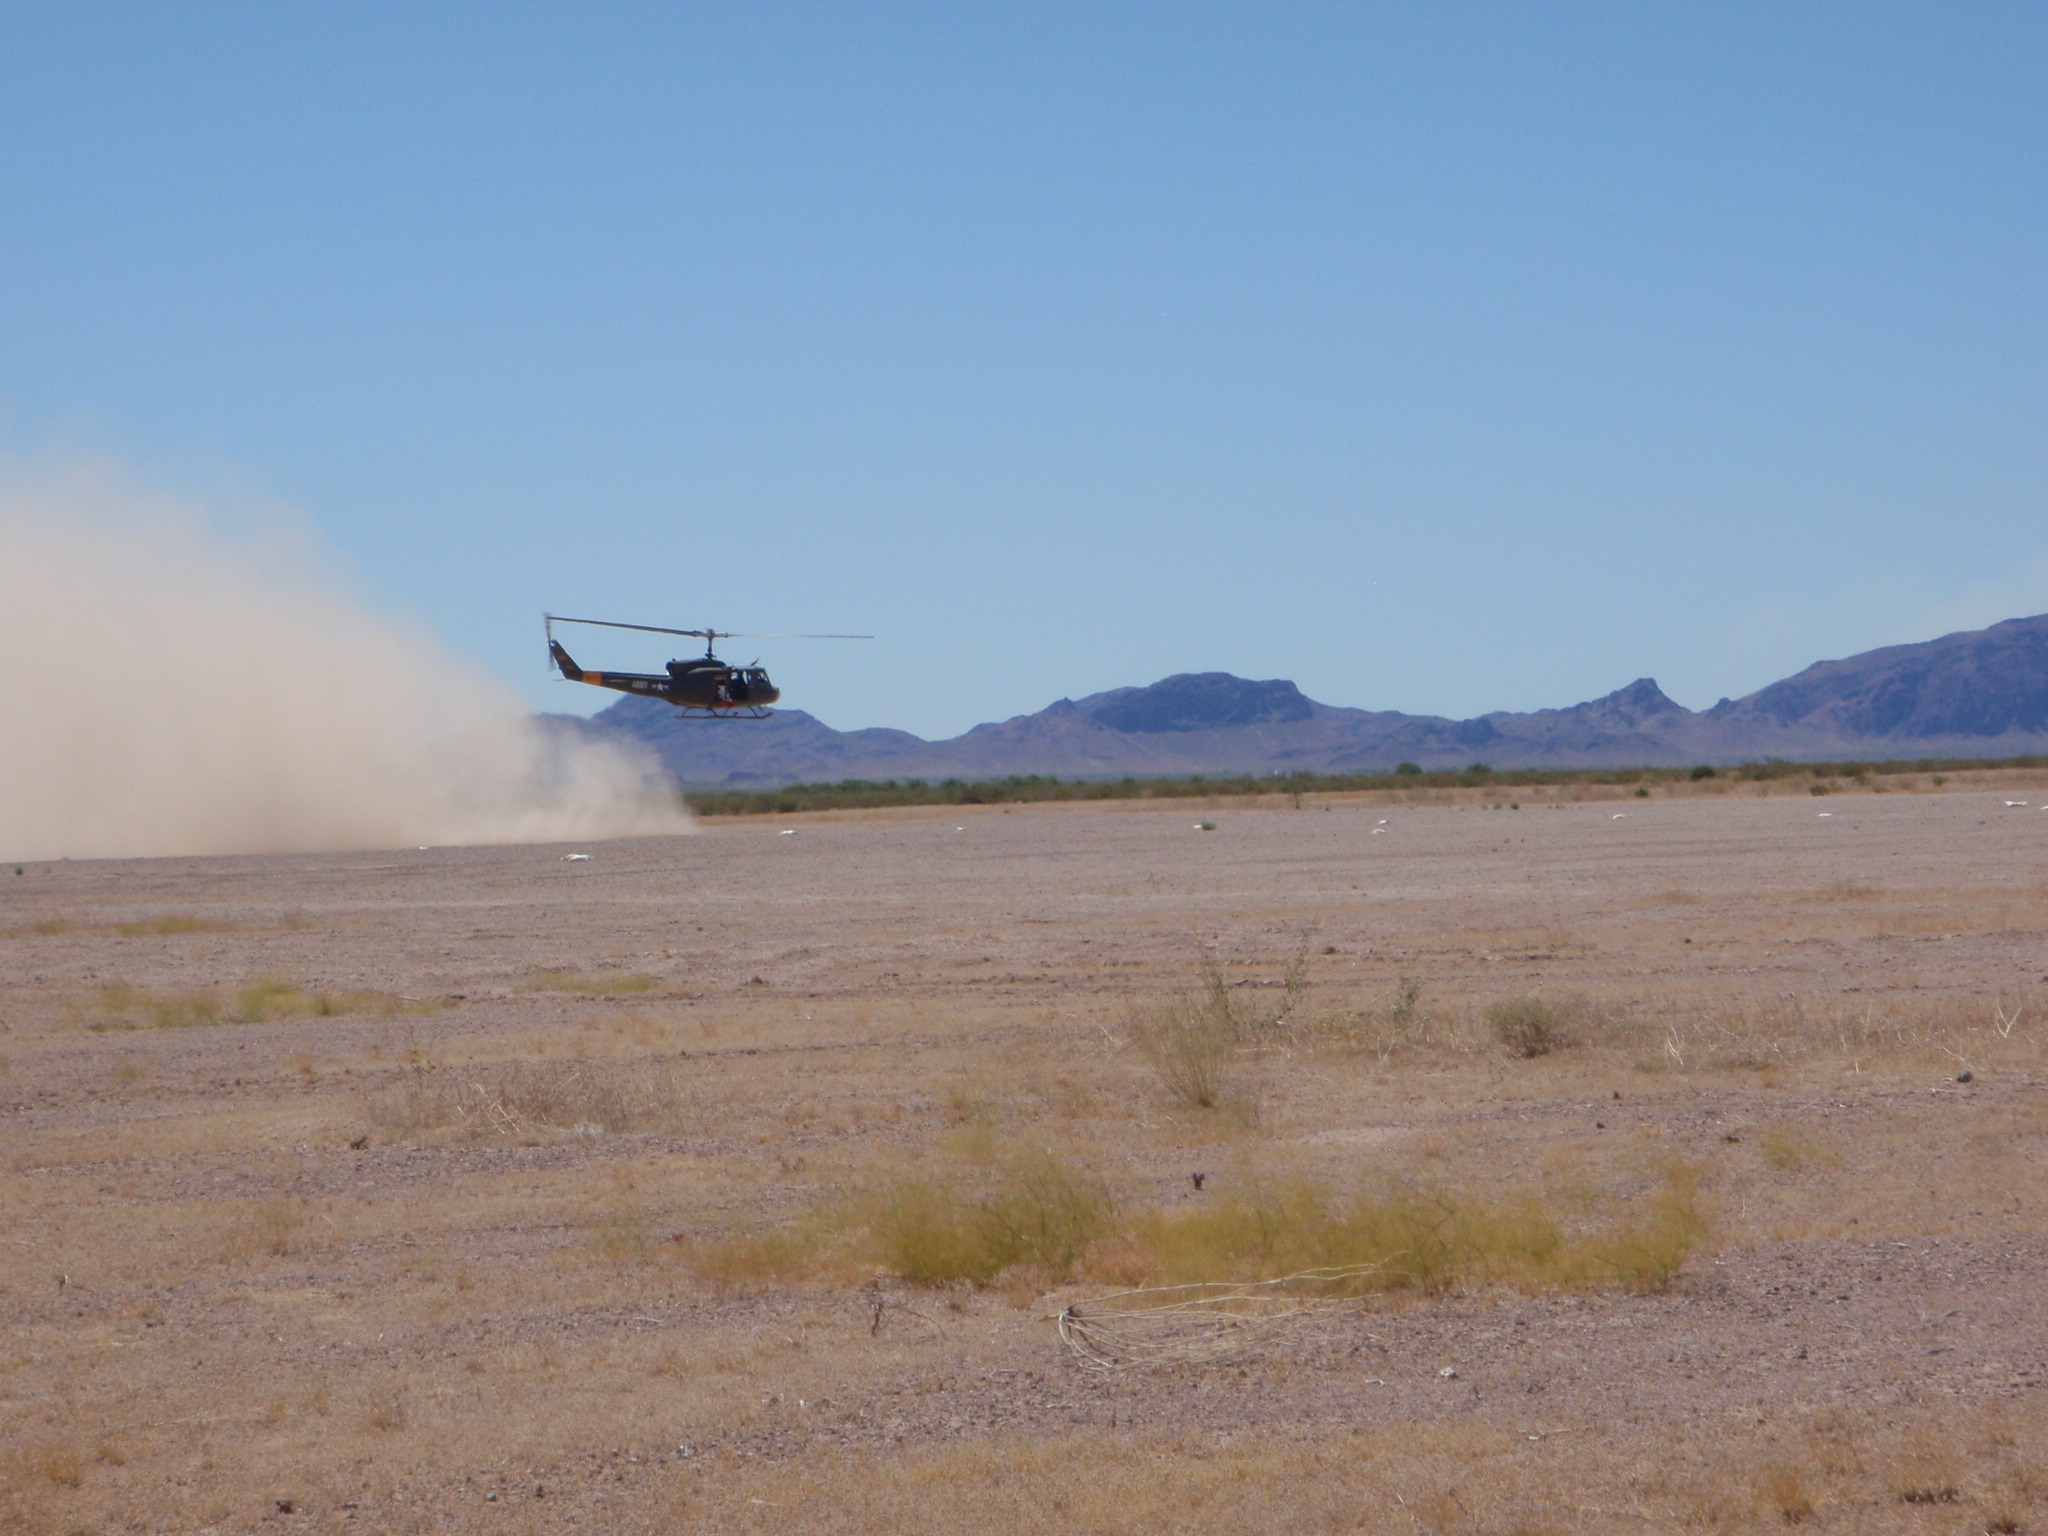 A helicopter lands on the dusty plains at Yuma Proving Grounds, AZ in an effort to better understand Helicopter Brownout